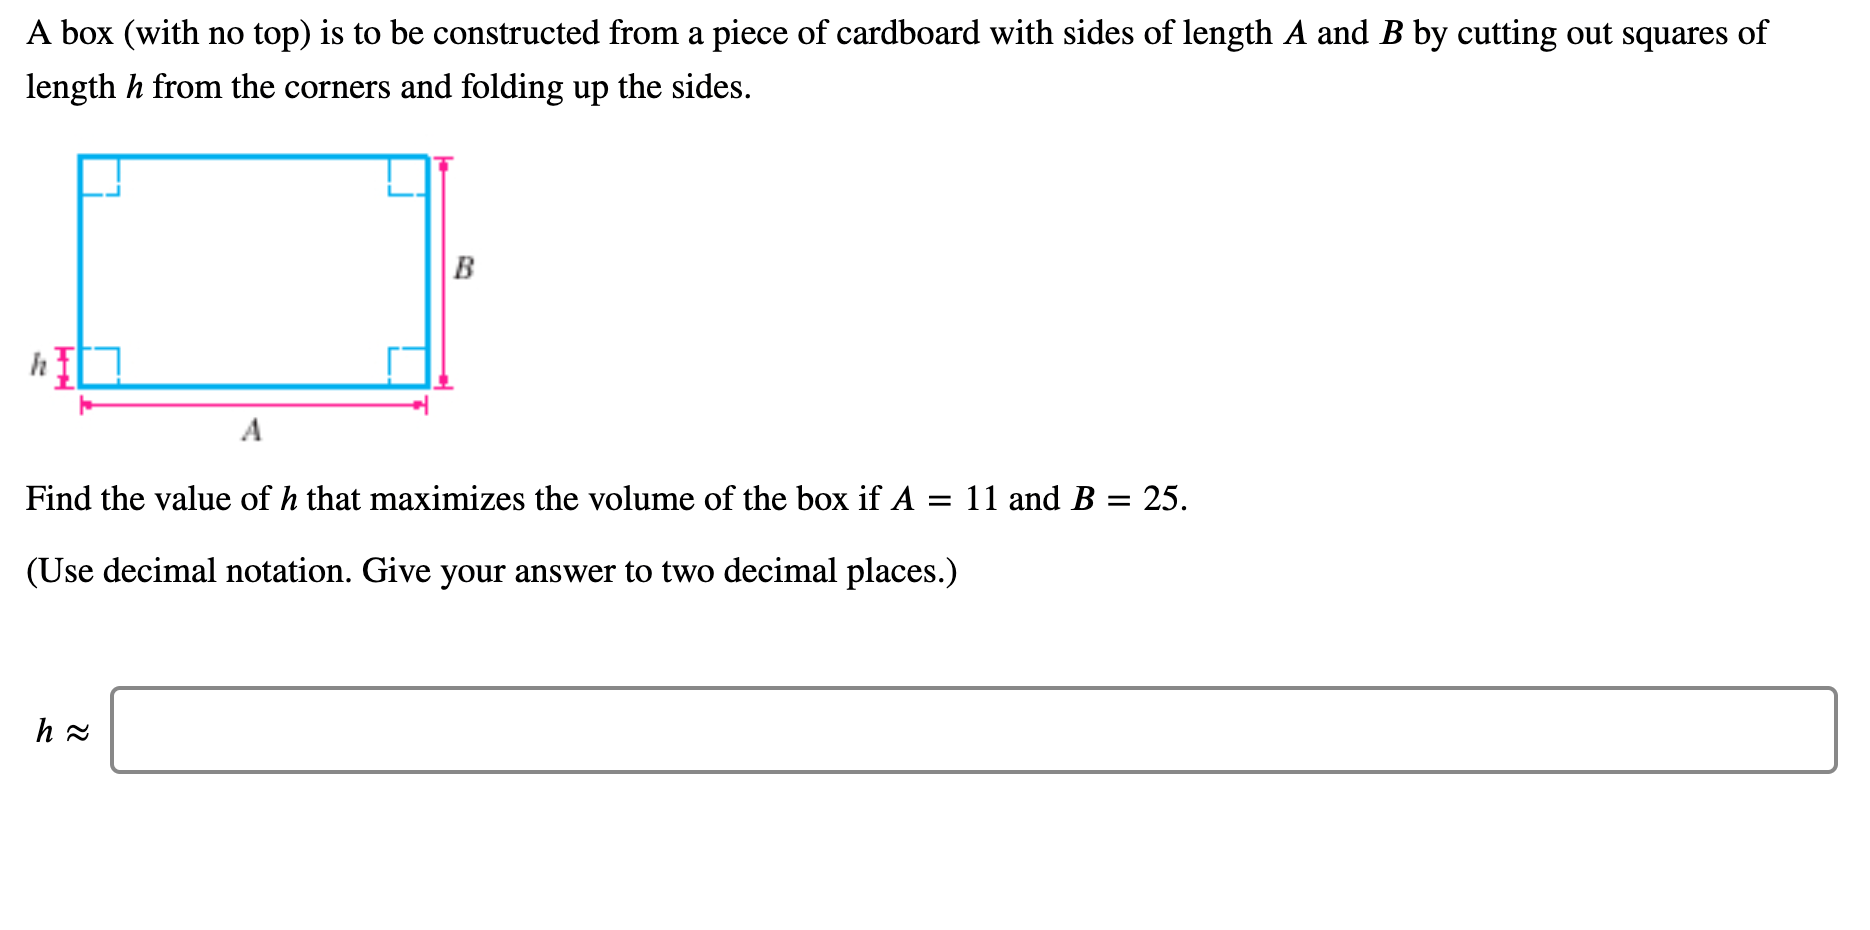 A box (with no top) is to be constructed from a piece of cardboard with sides of length A and B by cutting out squares of
length h from the corners and folding up the sides.
B
A
Find the value of h that maximizes the volume of the box if A = 11 and B = 25.
%3D
(Use decimal notation. Give your answer to two decimal places.)
